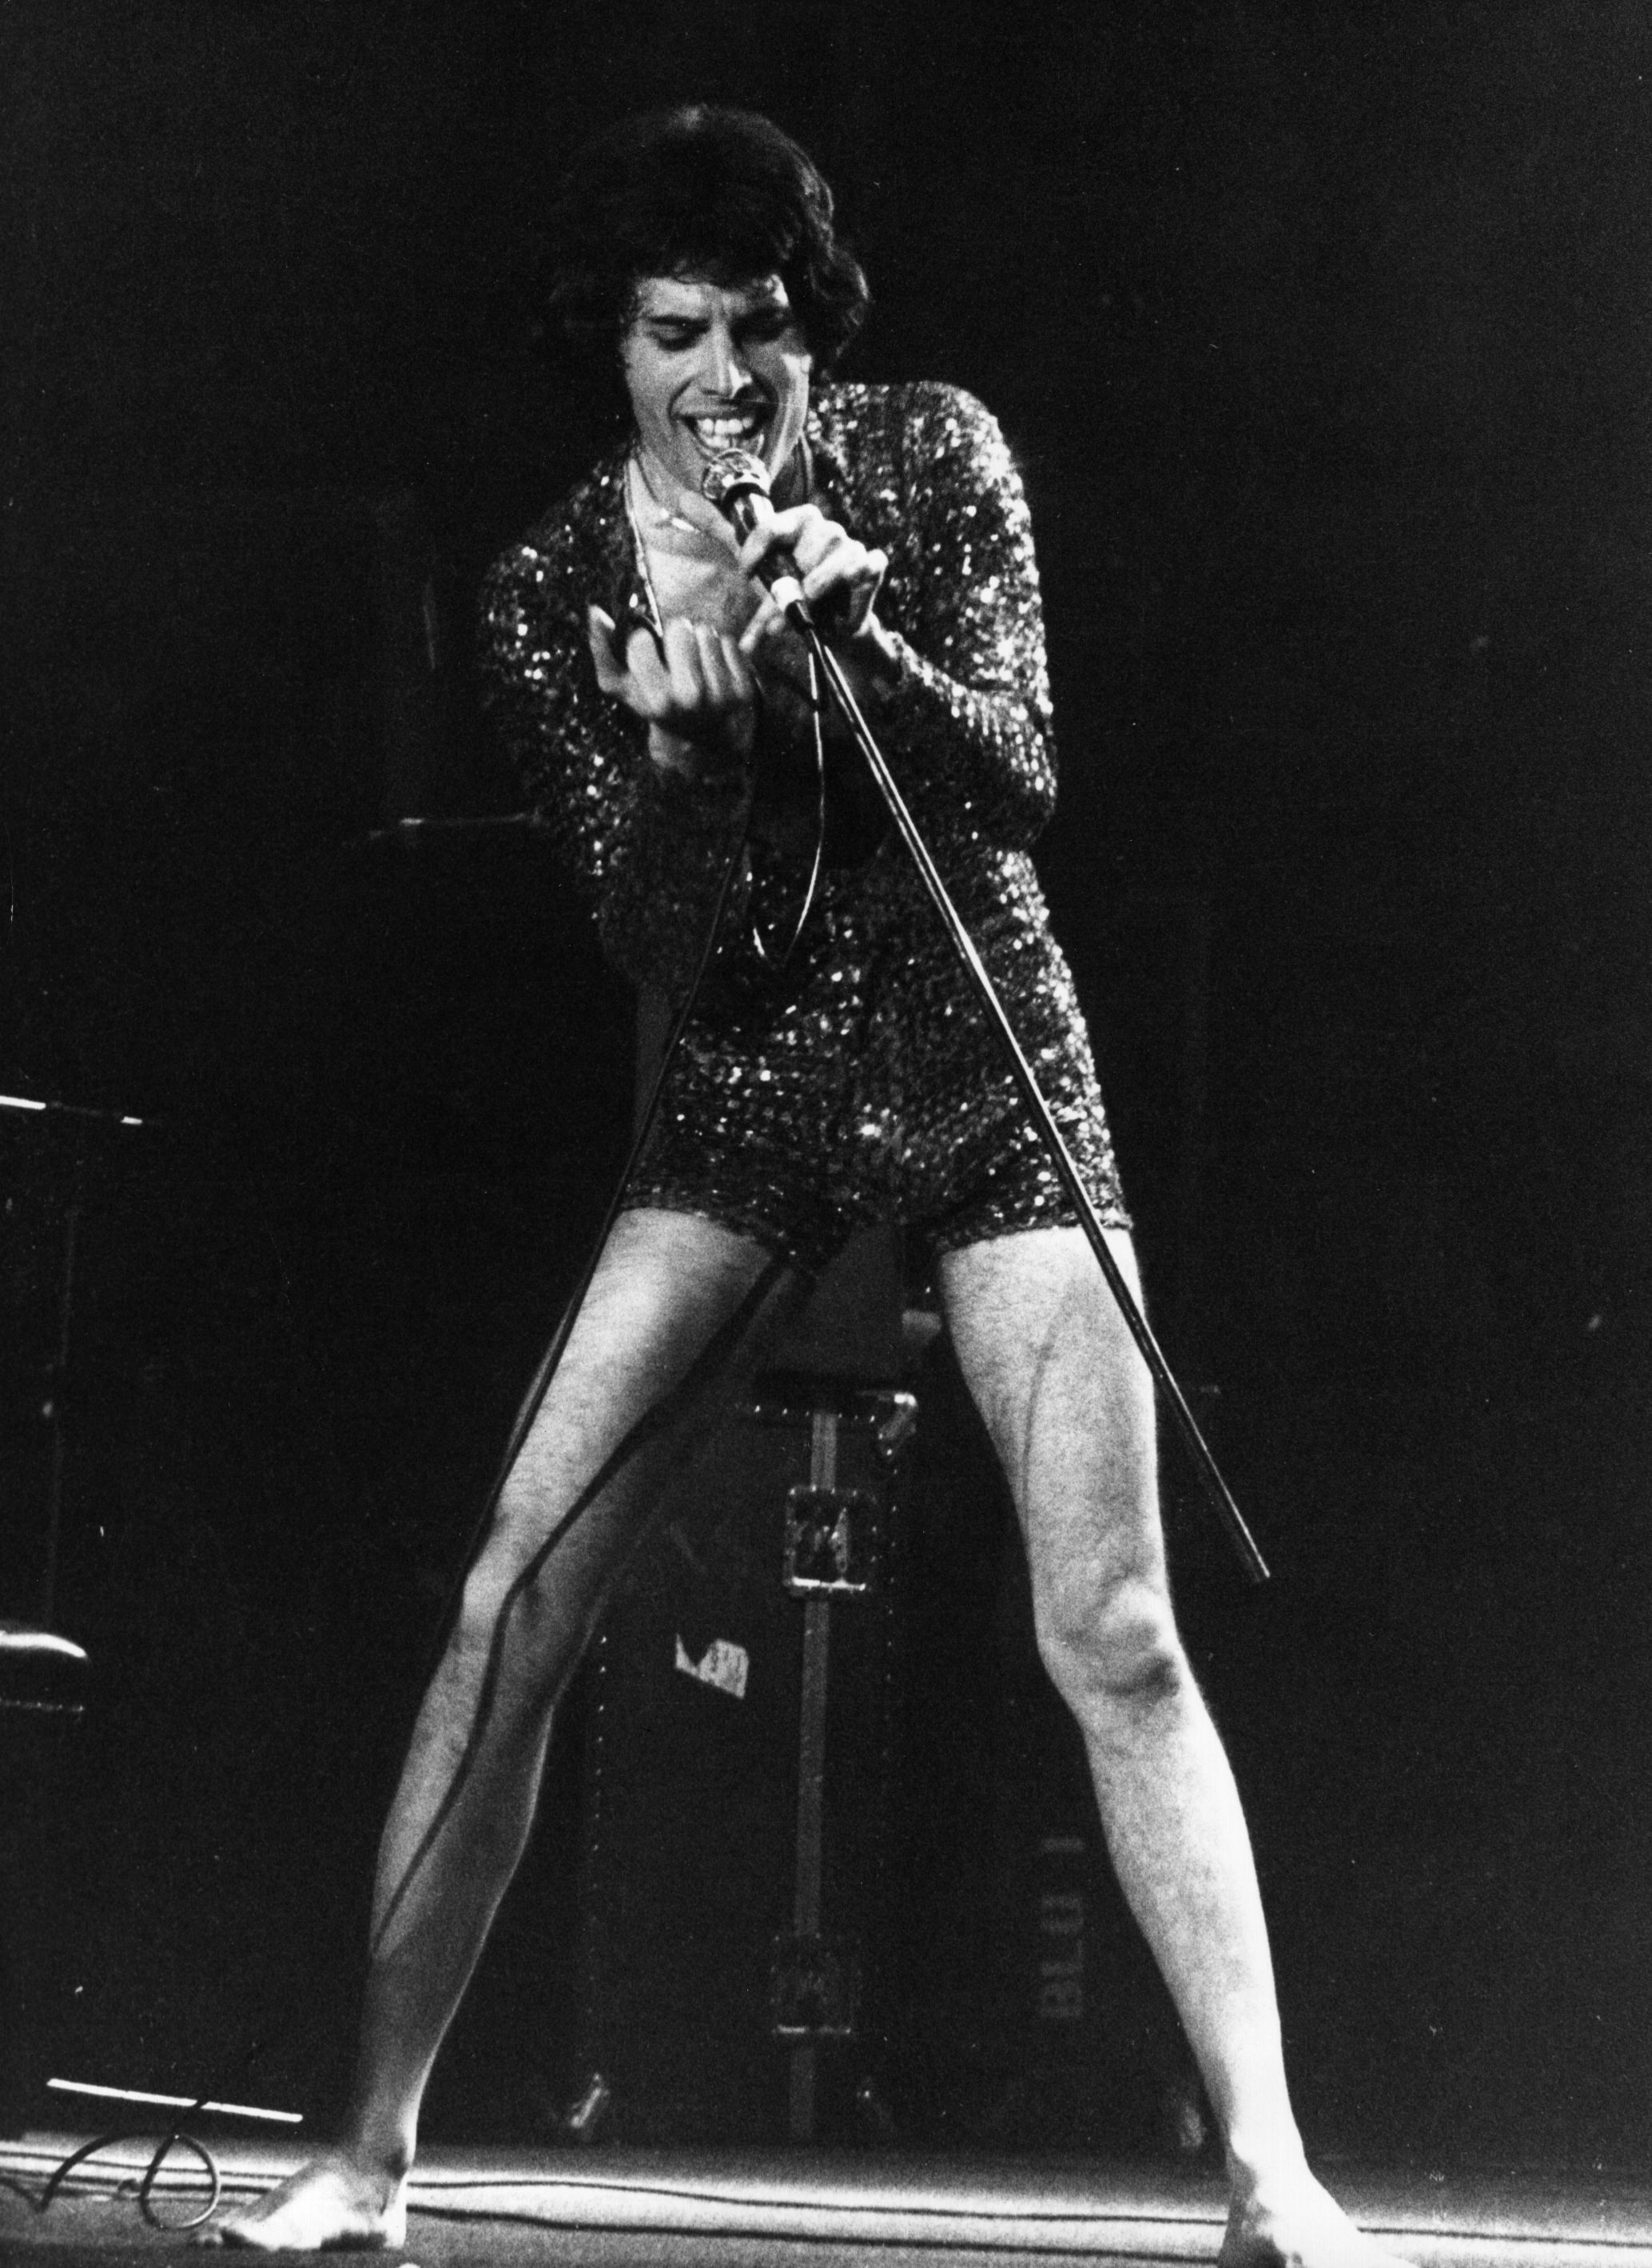 May 1978: Freddie Mercury (Frederick Bulsara, 1946 - 1991), singer with popular British rock group Queen, on stage with the band at the first of three sell-out nights at London's Wembley Arena, May 1972. (Photo by Gary Merrin/Keystone/Getty Images)